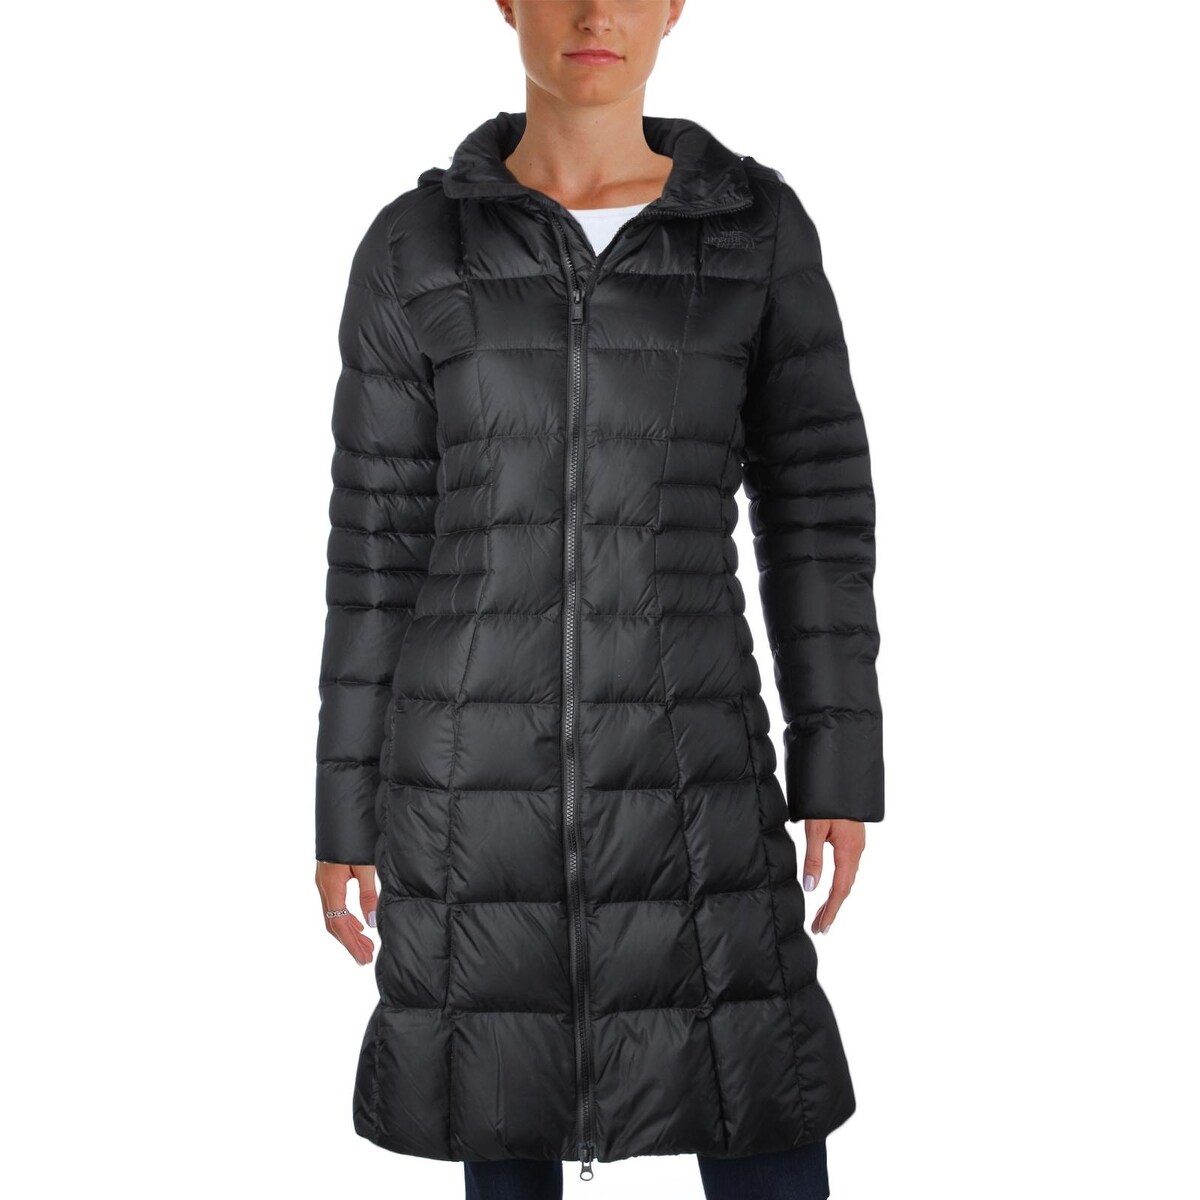 the north face women's puffer jacket